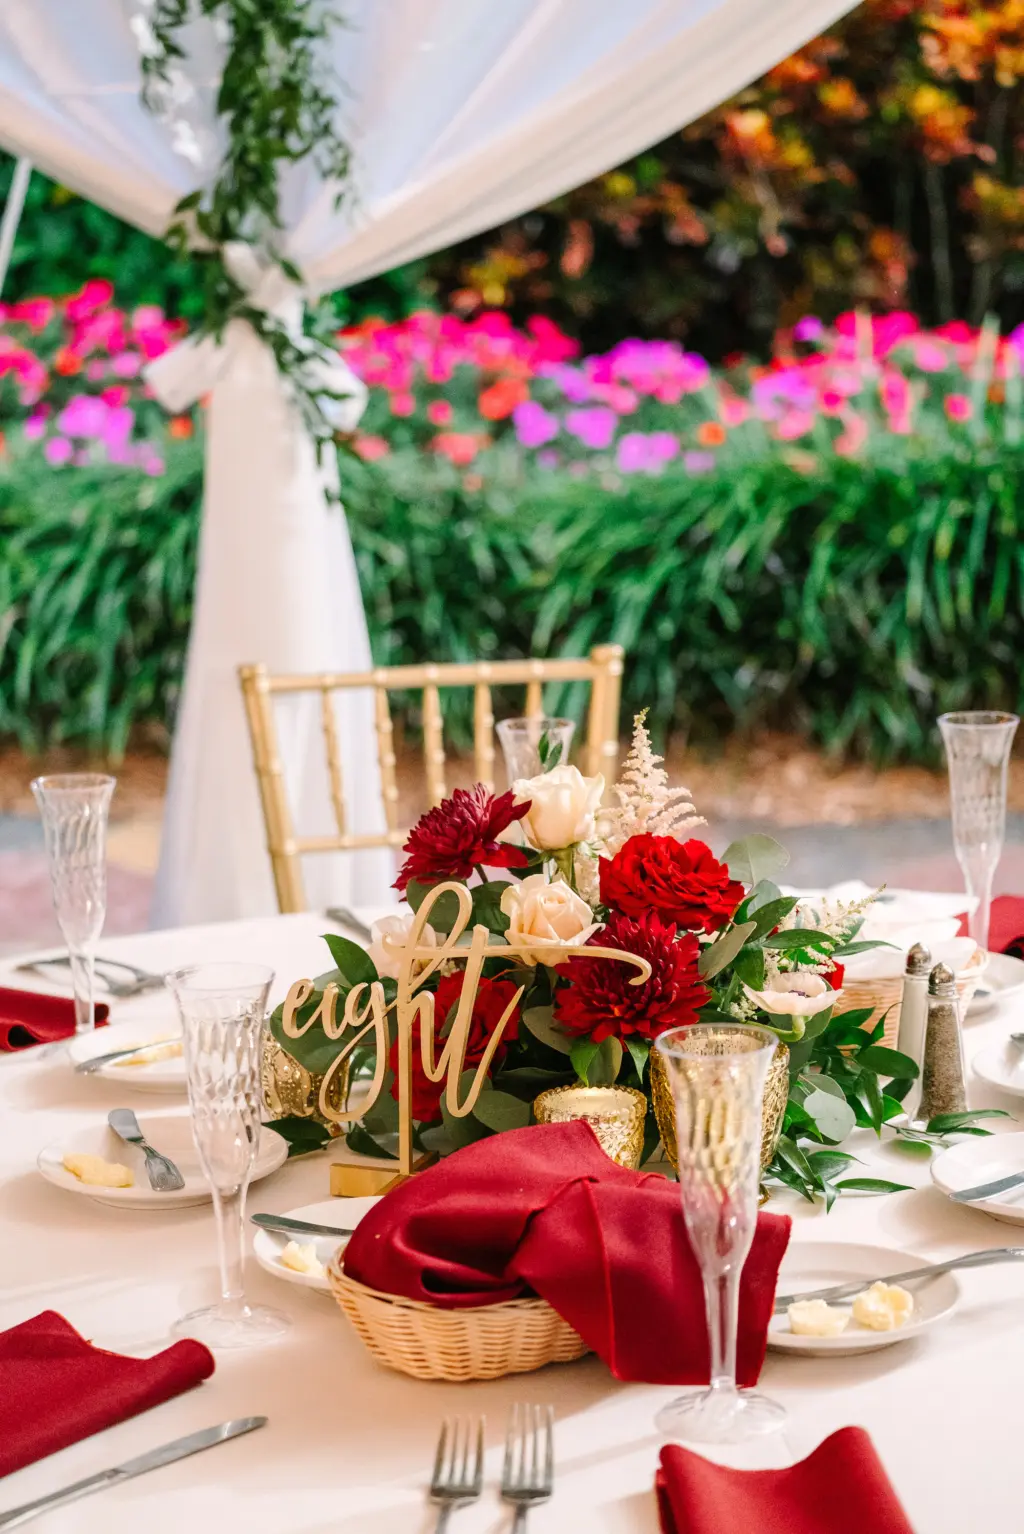 White and Red Christmas Inspired Wedding Reception Decor Ideas | Laser Cut Table Numbers | Red Roses, Chrysanthemums, White Anemone, and Greenery Centerpiece Inspiration | Gold Chiavari Chairs